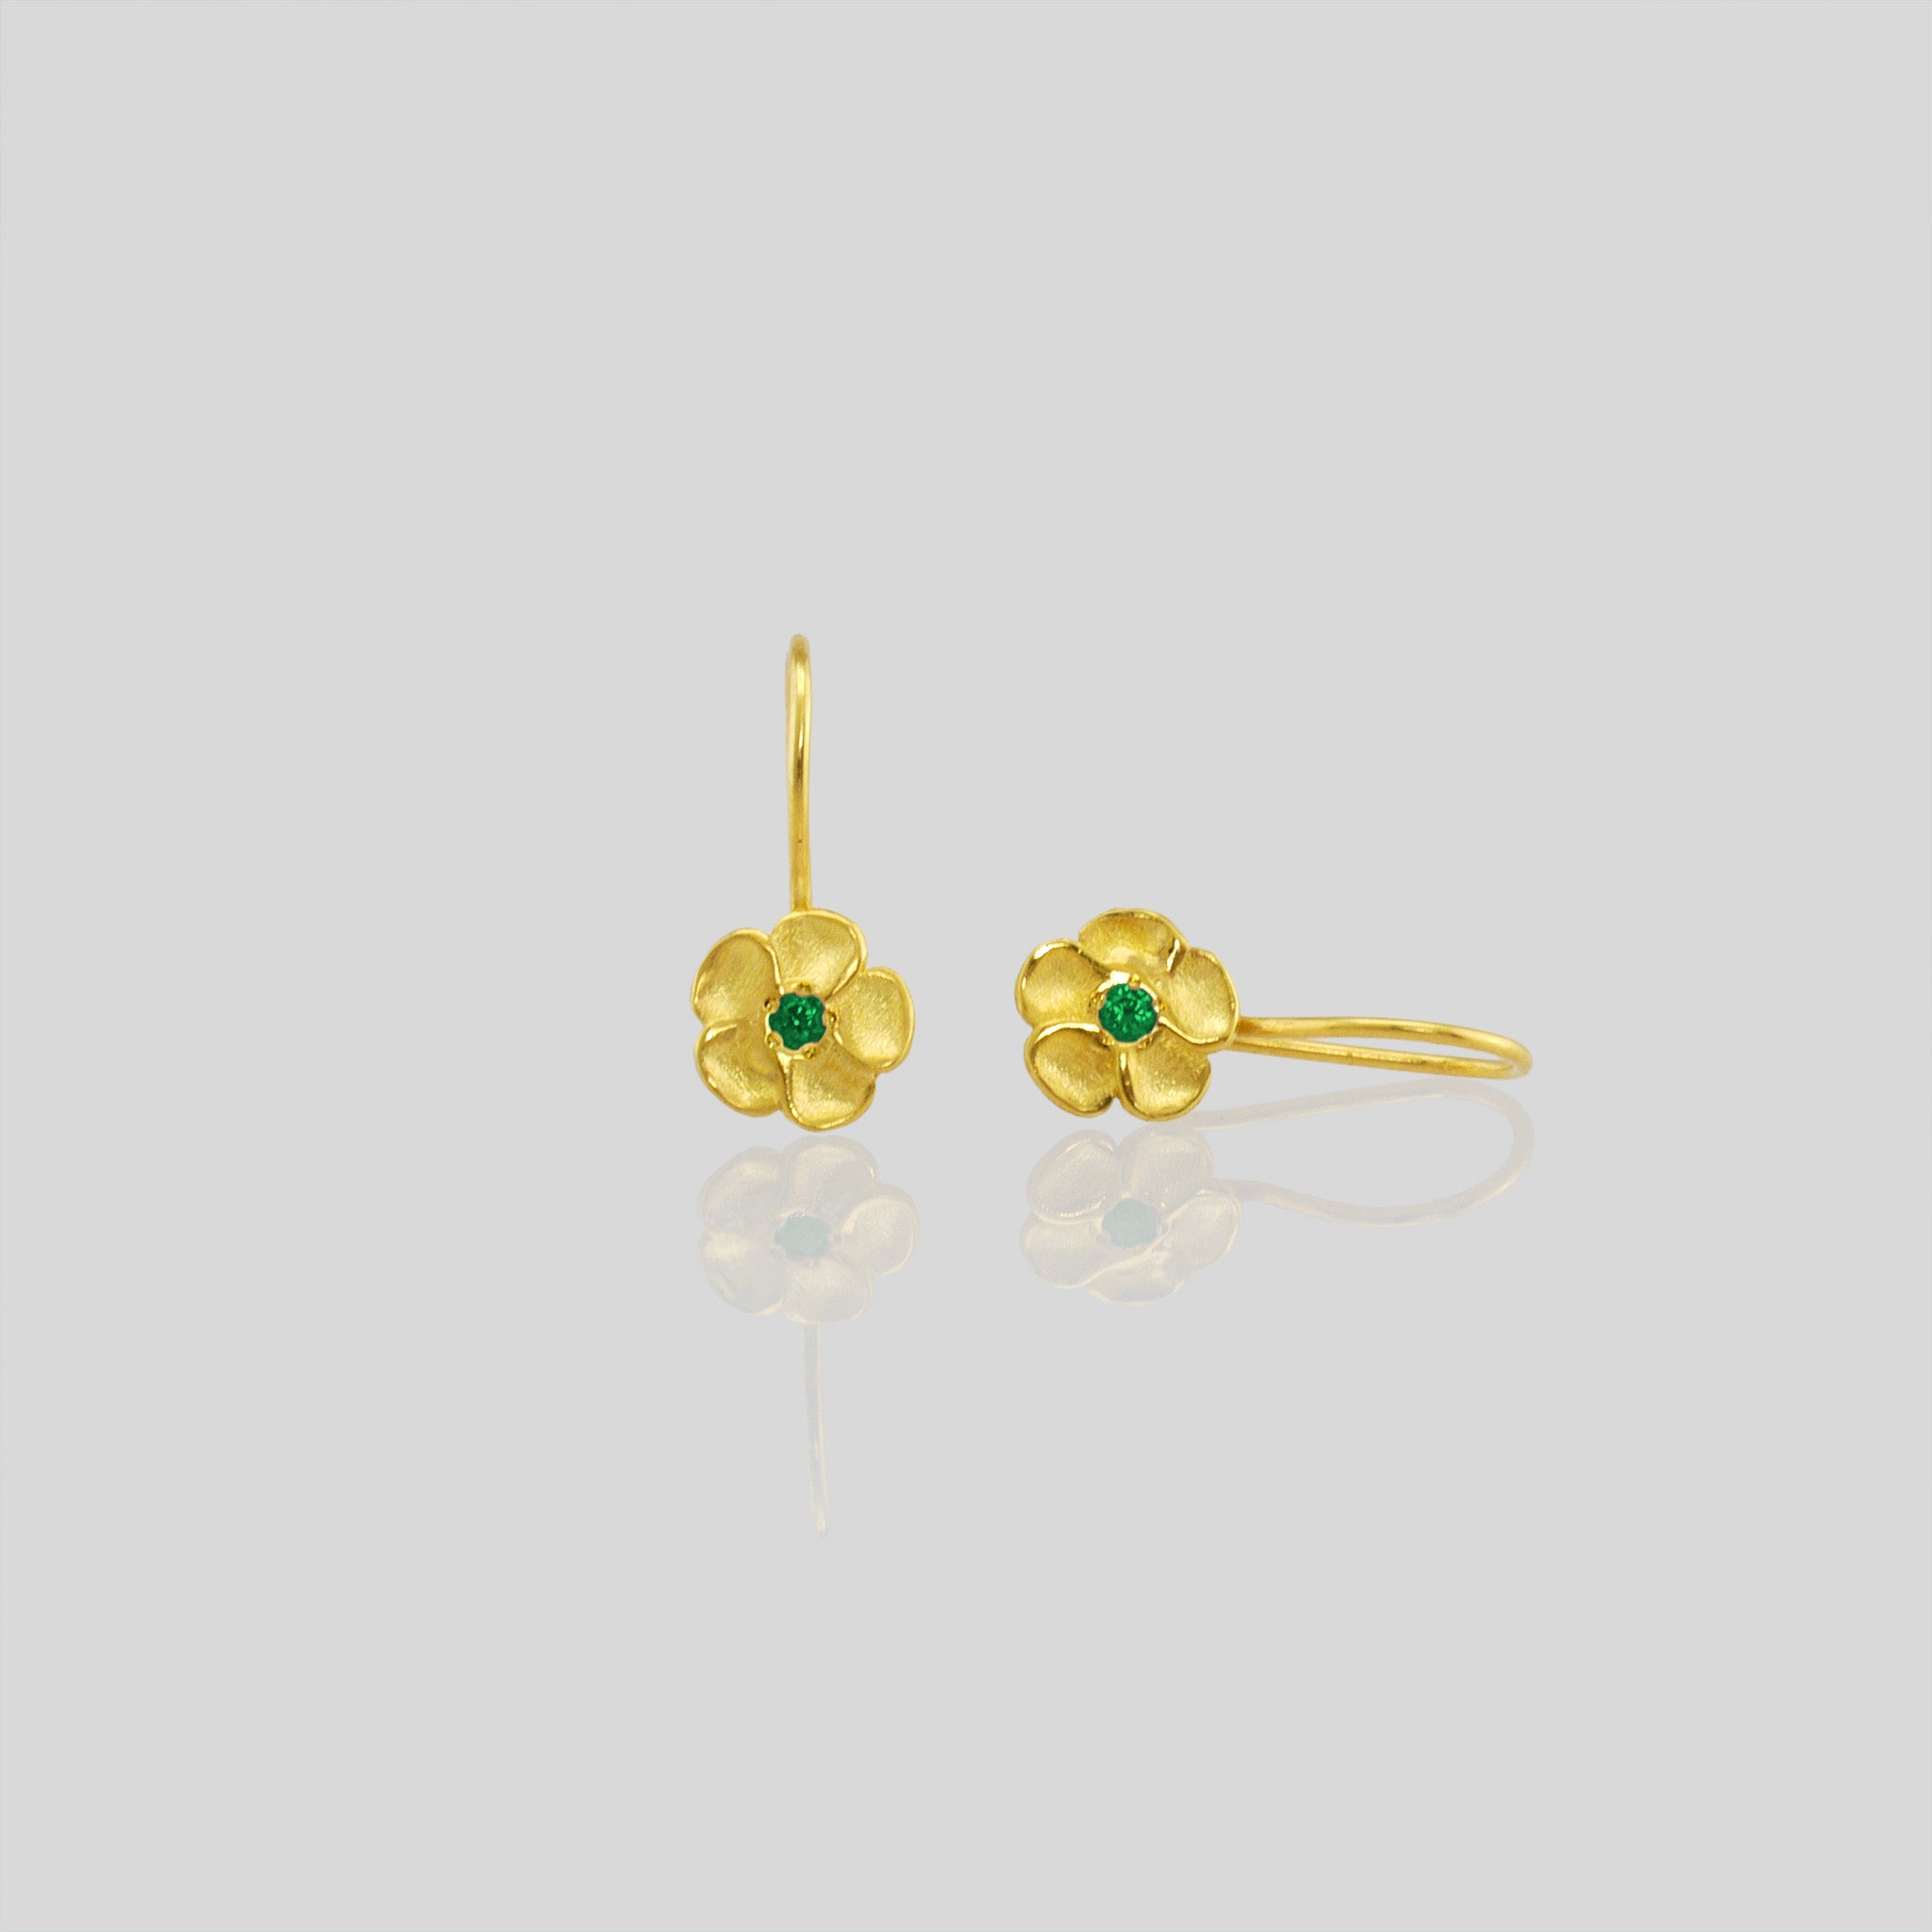 Delicate yellow gold flower drop earrings with a sparkling Emerald center. Perfect for any occasion!